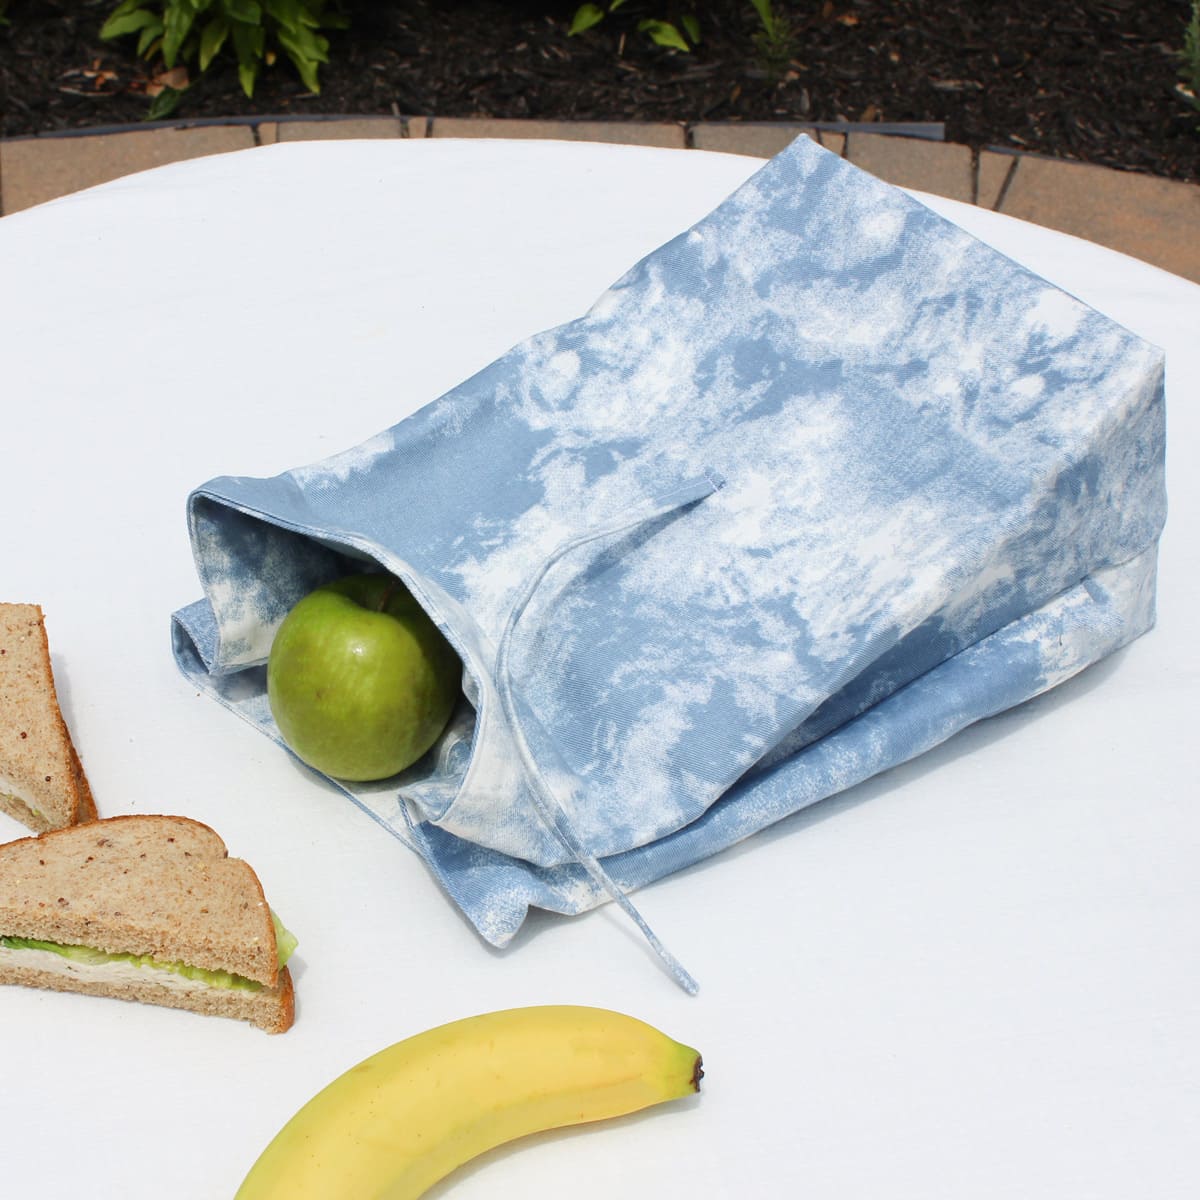 DIY Re-usable Lunch Bag Pattern